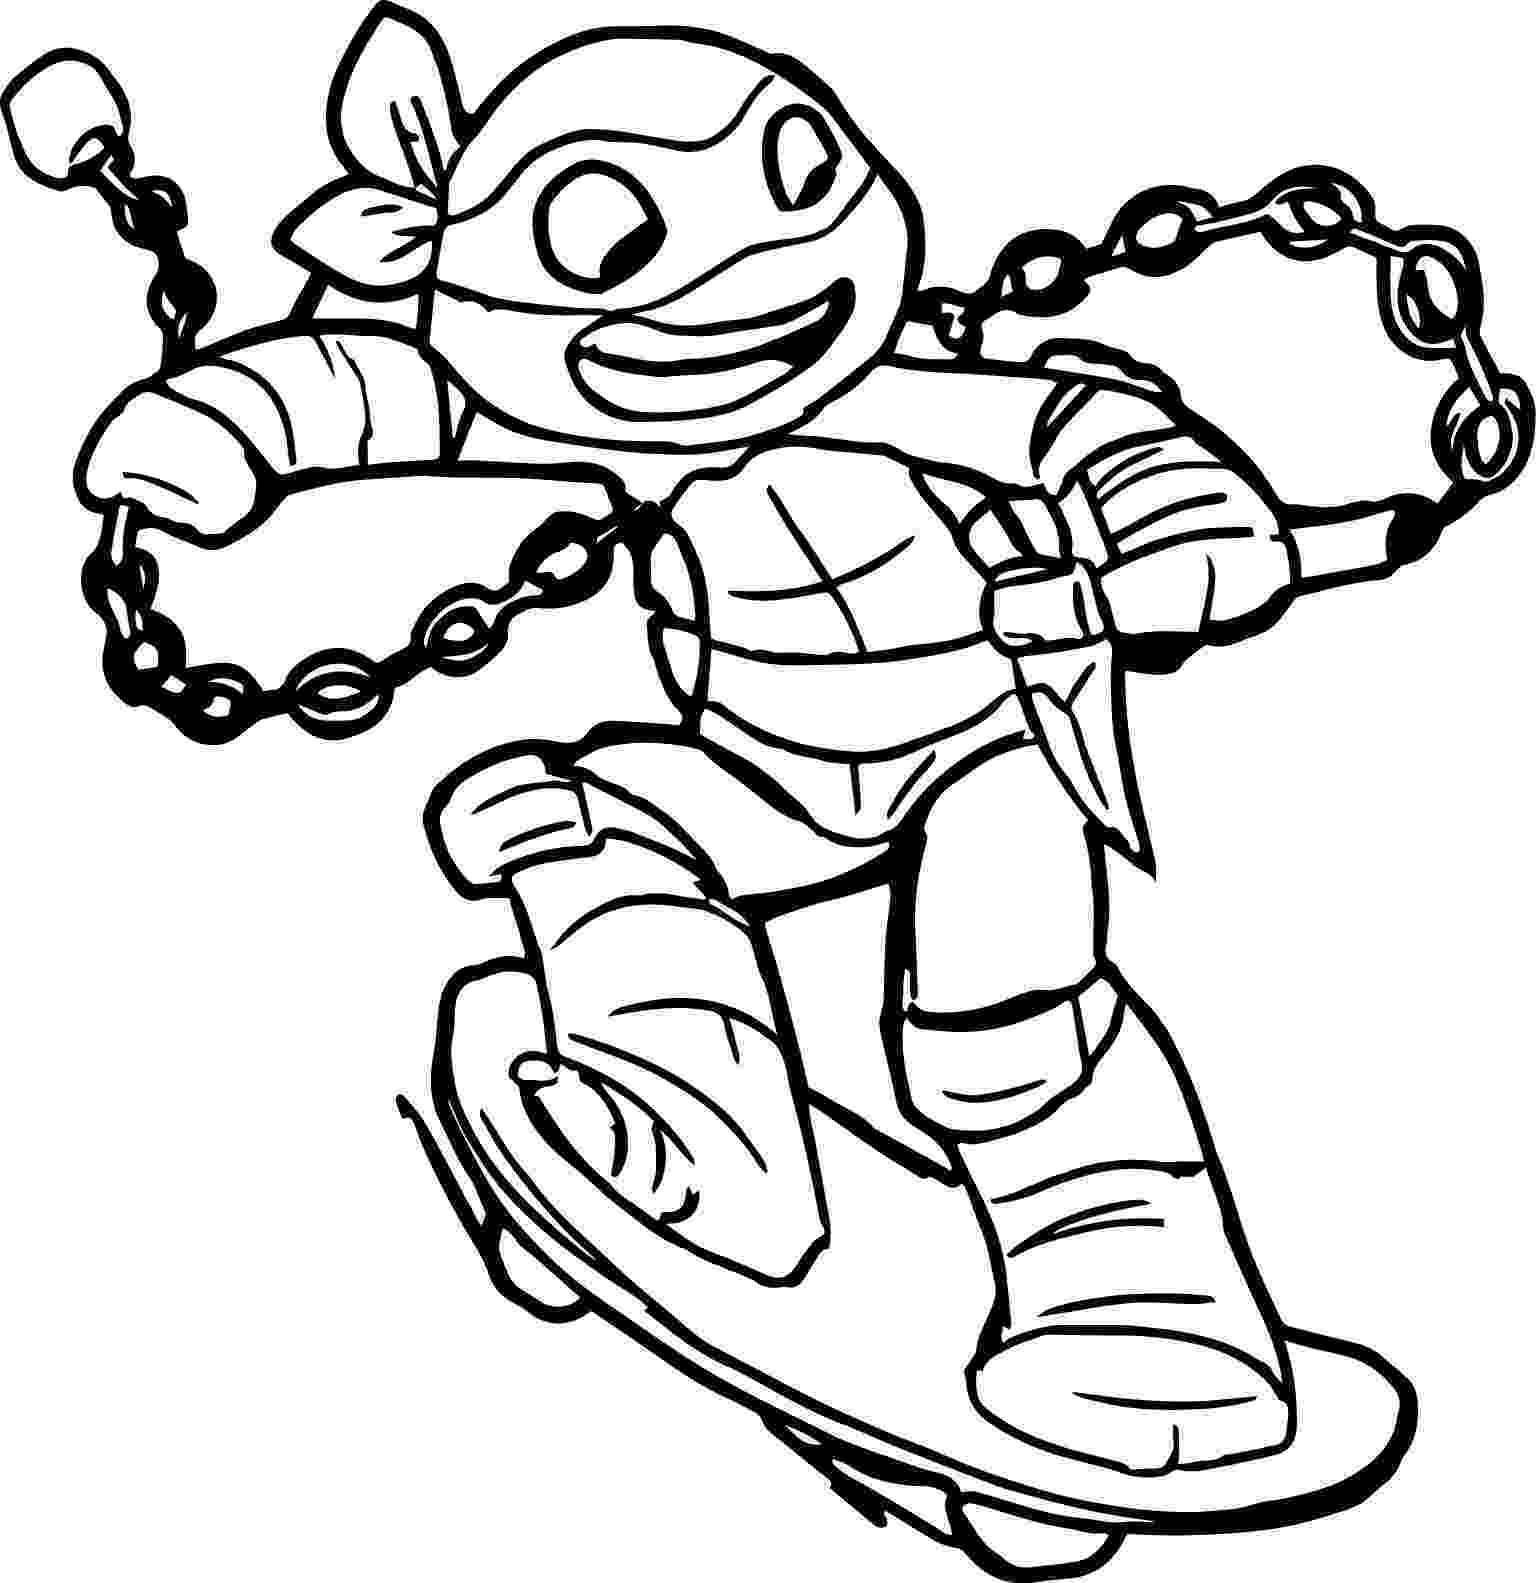 colouring pages ninja turtles ninja turtle coloring pages free printable pictures ninja turtles colouring pages 